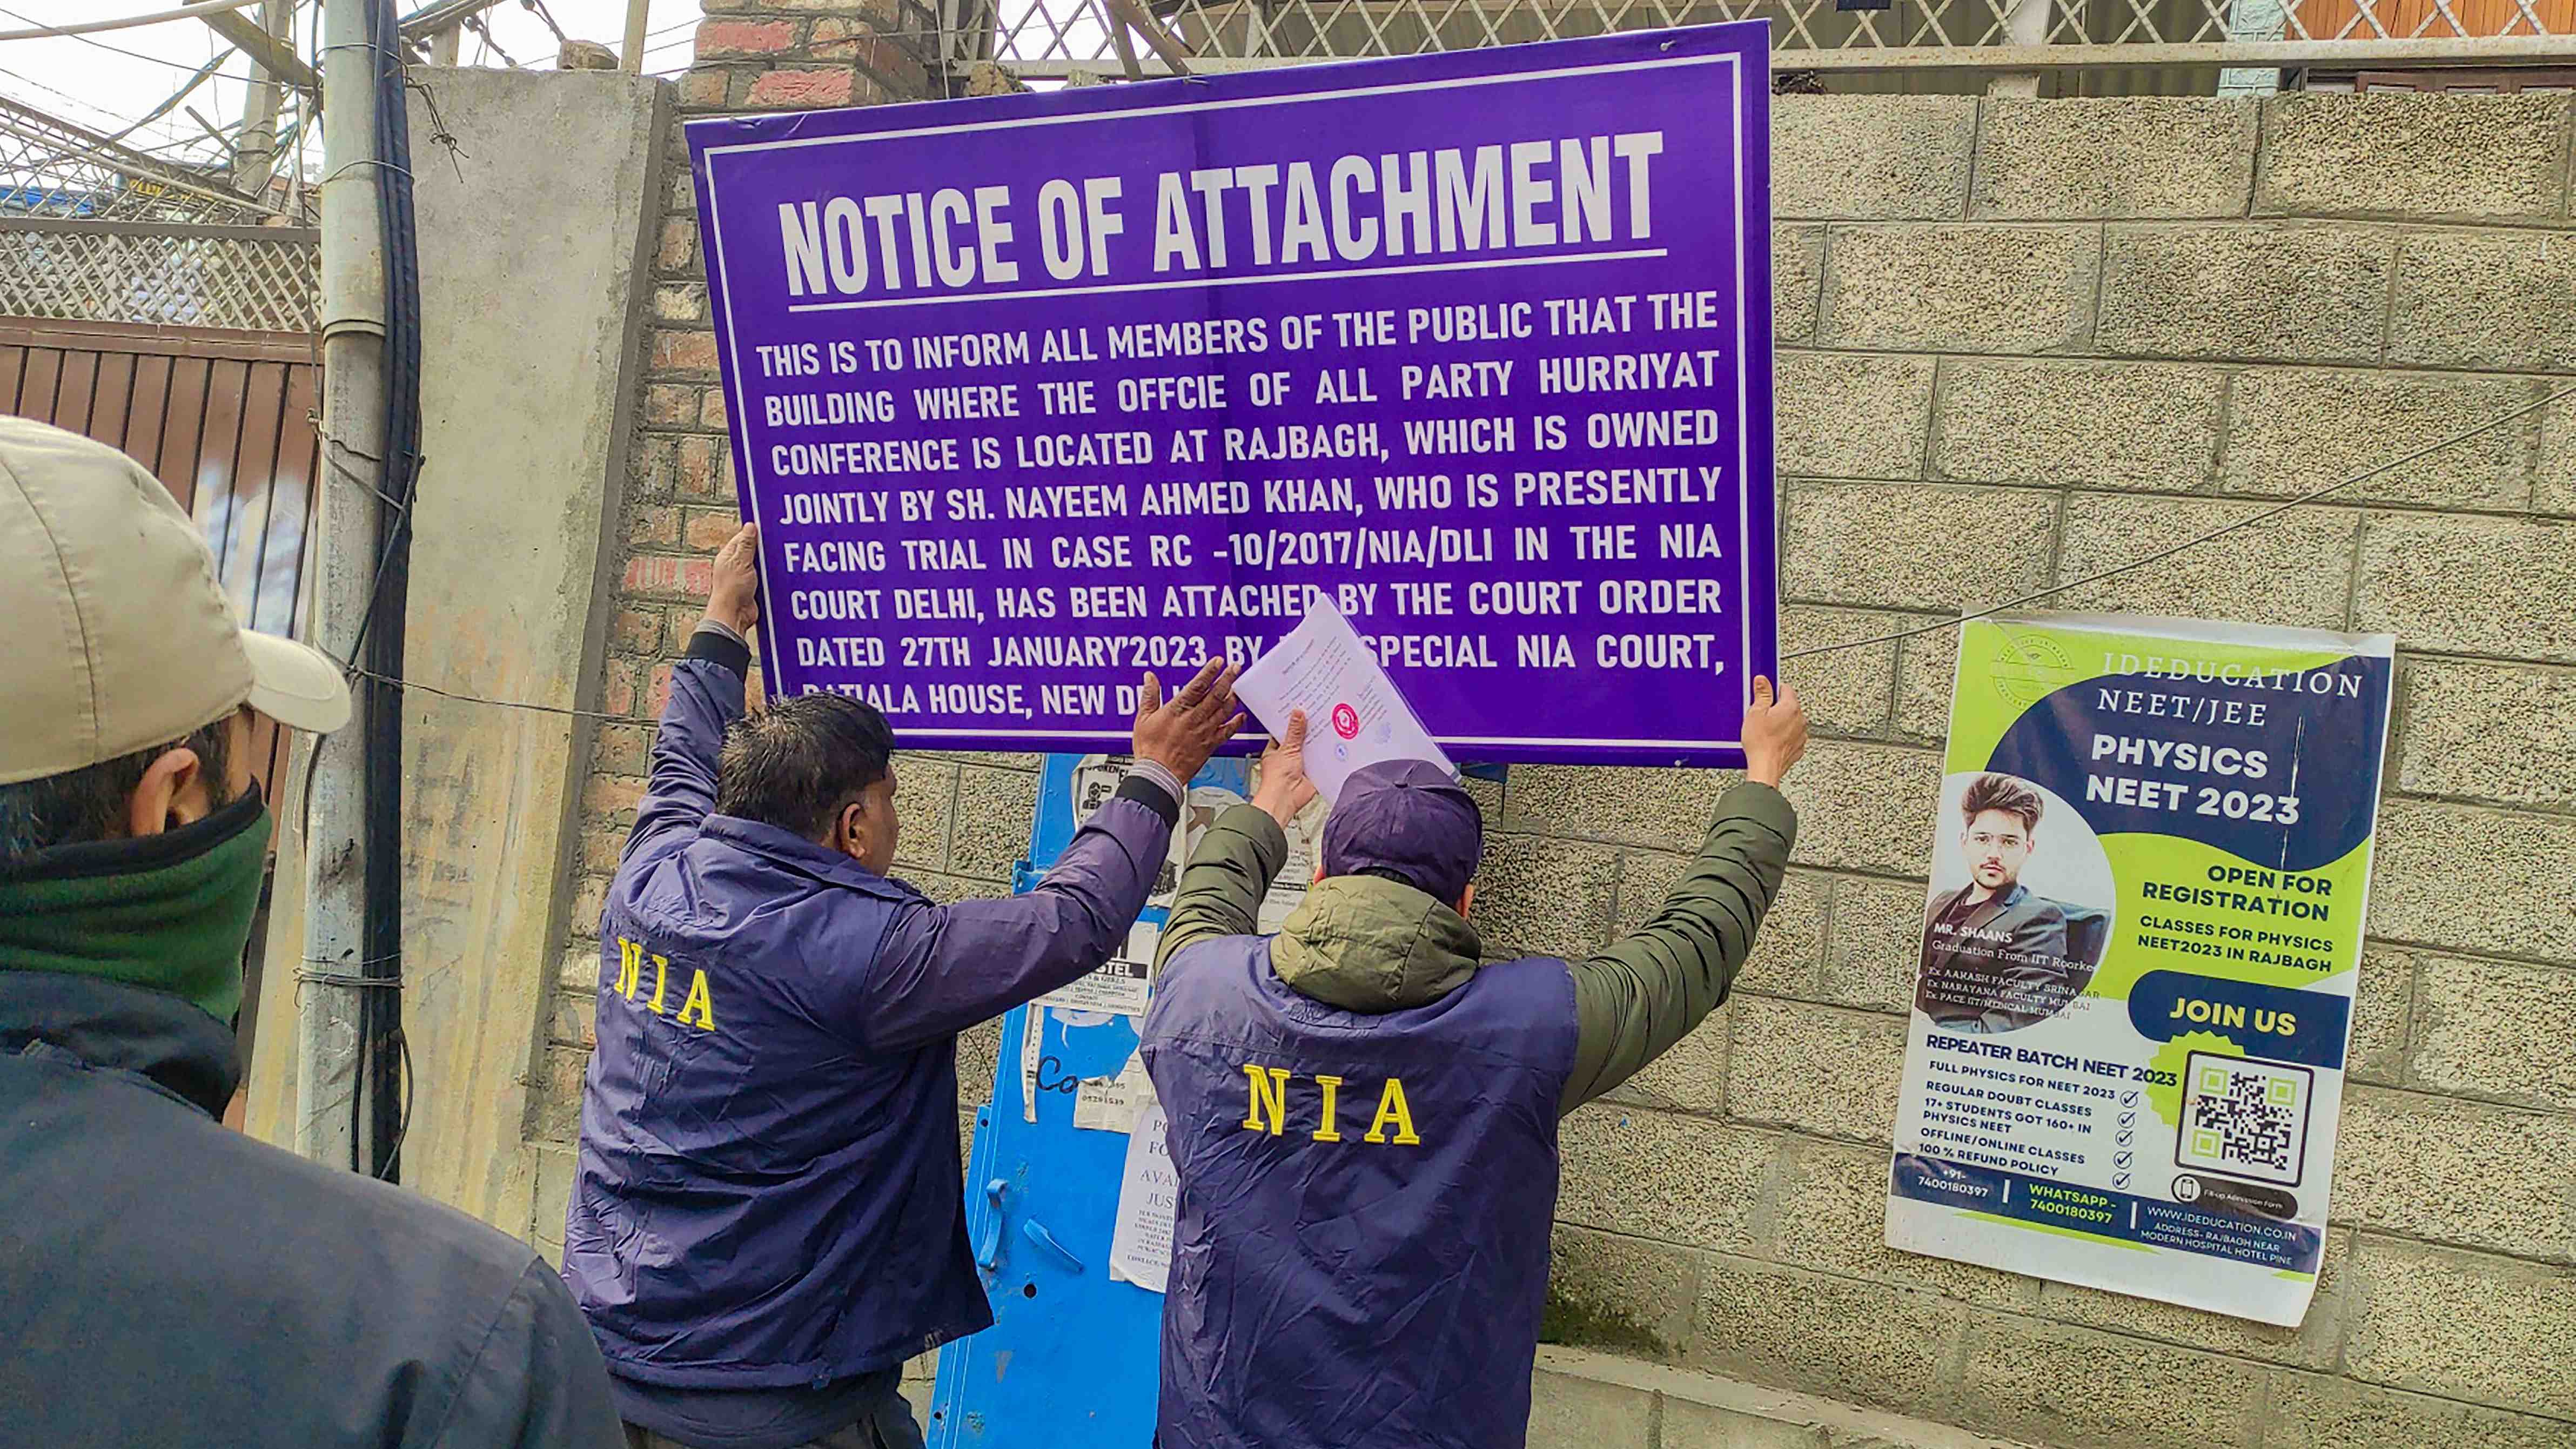  A National Investigation Agency (NIA) officers put up the Notice of Attachment board at the office of Hurriyat Conference in the Rajbhag area. Credit: PTI Photo